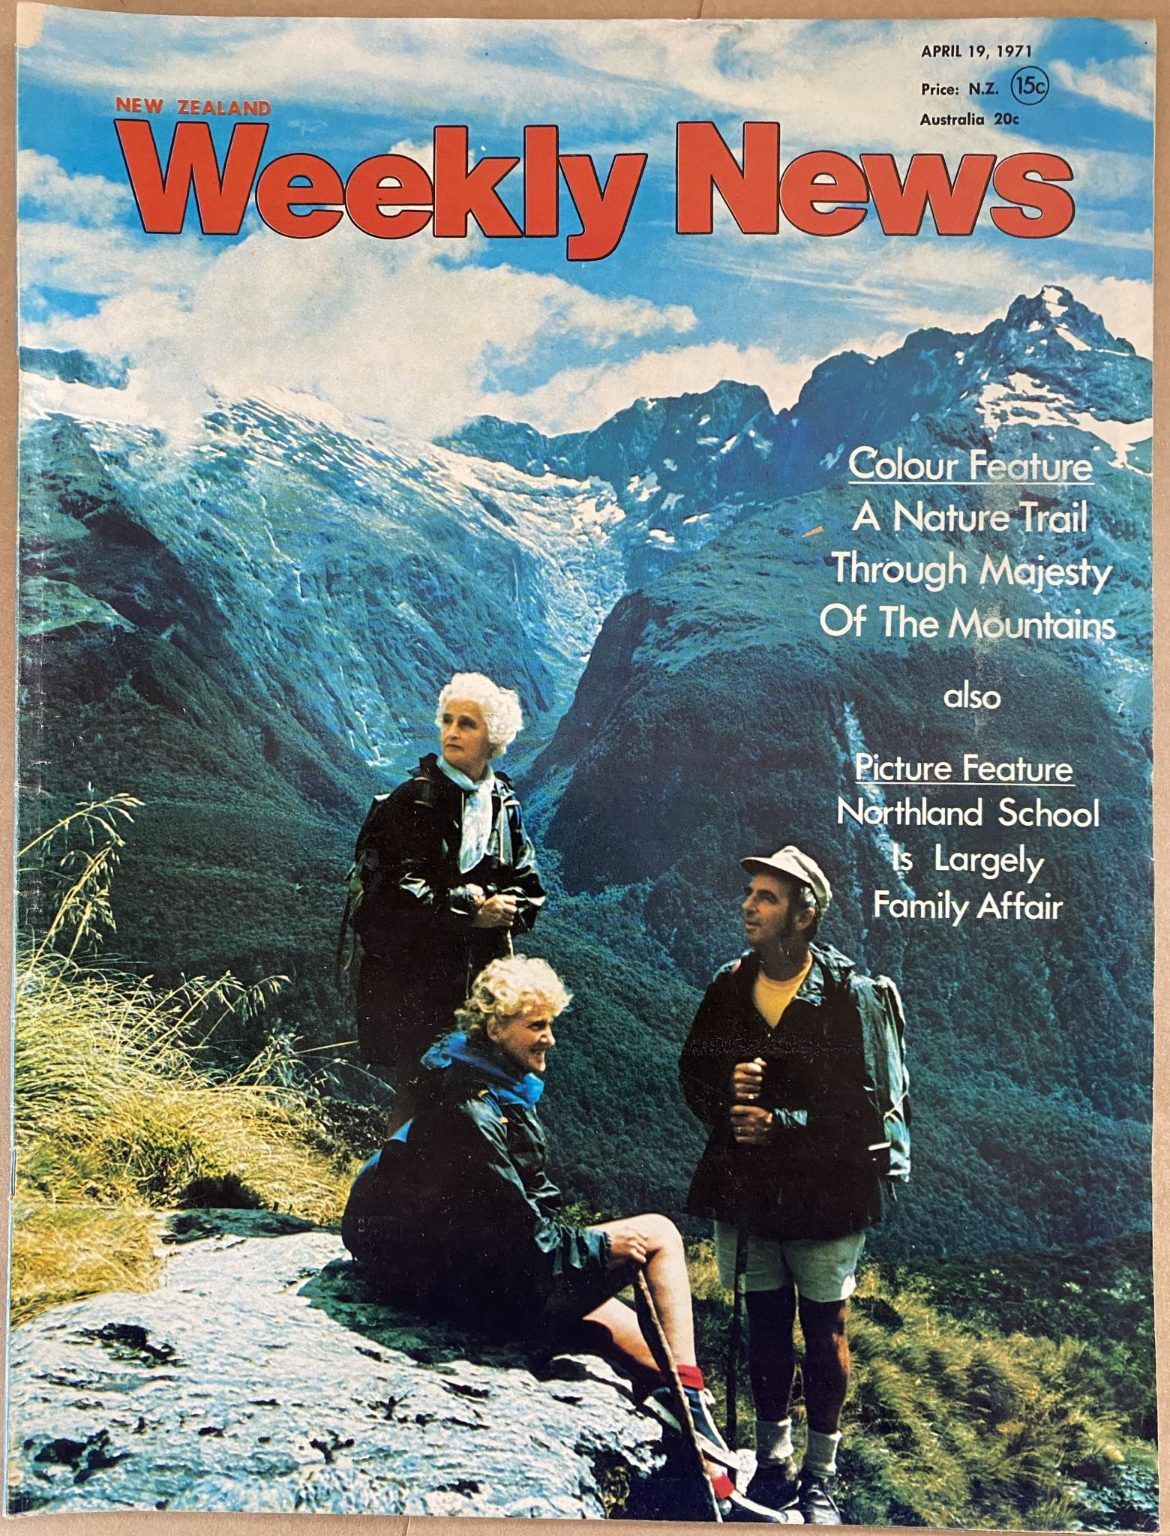 OLD NEWSPAPER: New Zealand Weekly News, No. 5602, 19 April 1971